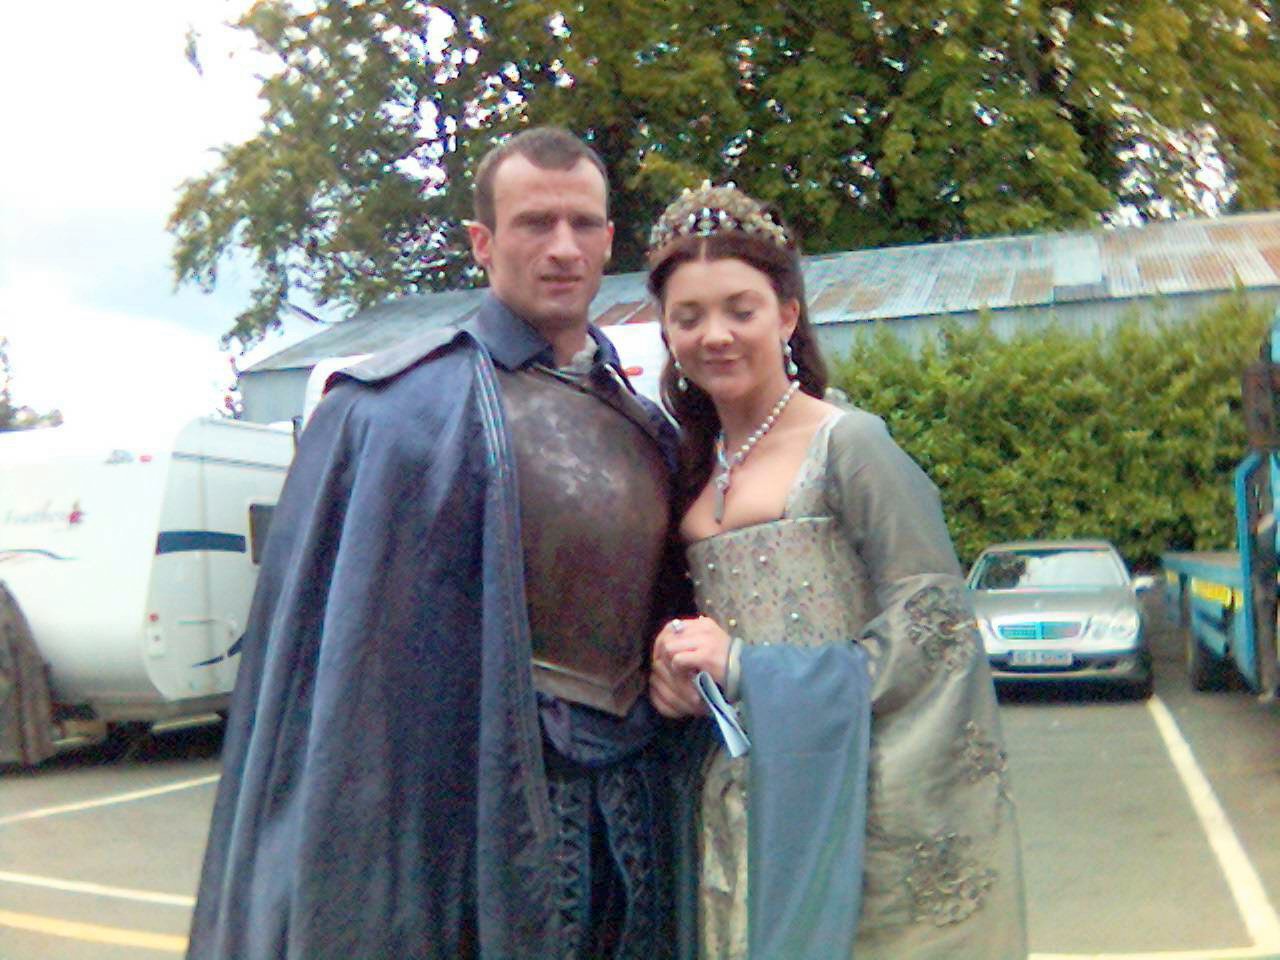 on the set of The Tudors with Natalie Dormer